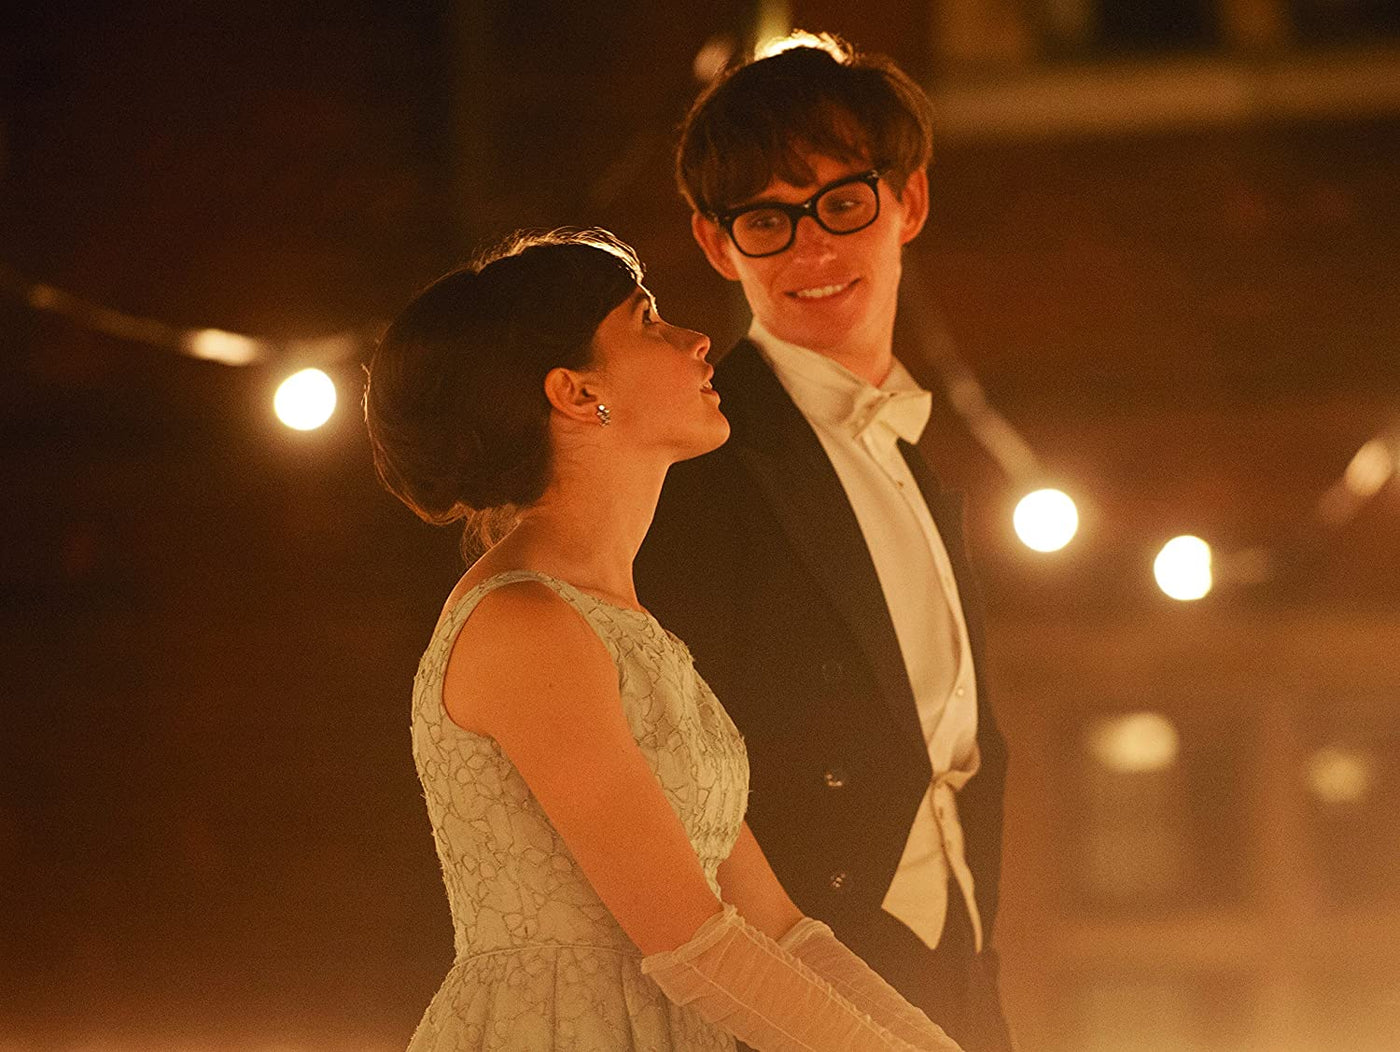 The Theory Of Everything [2015] (DVD)